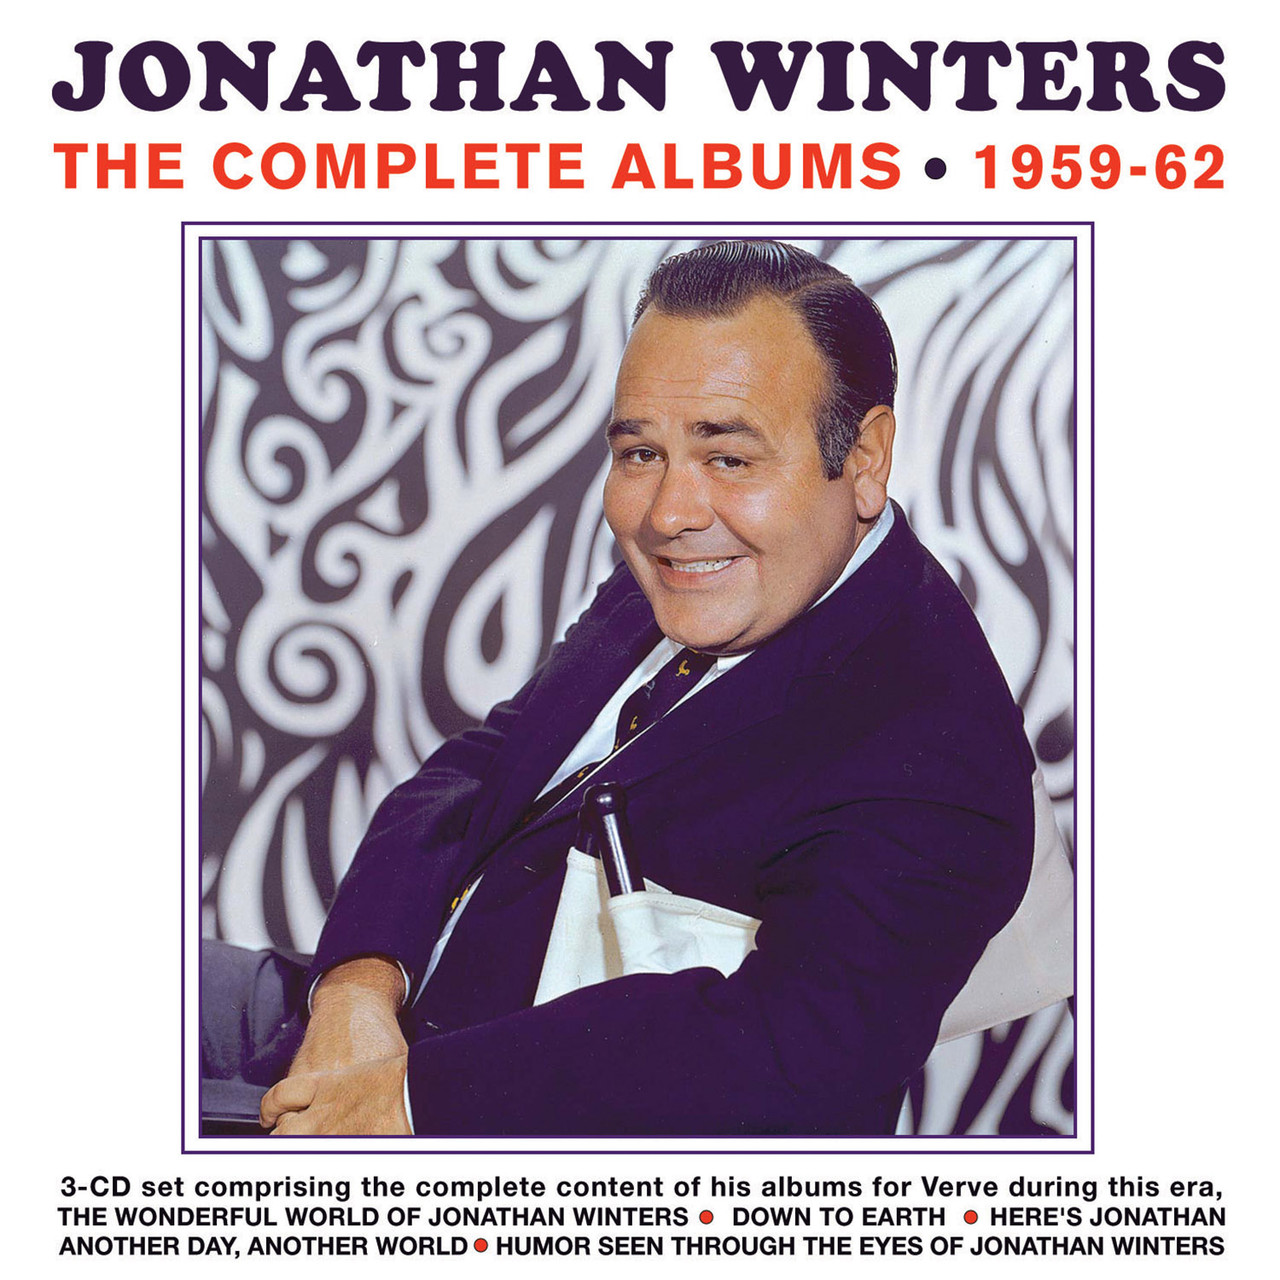 Jonathan Winters: The Complete Albums 1959-62